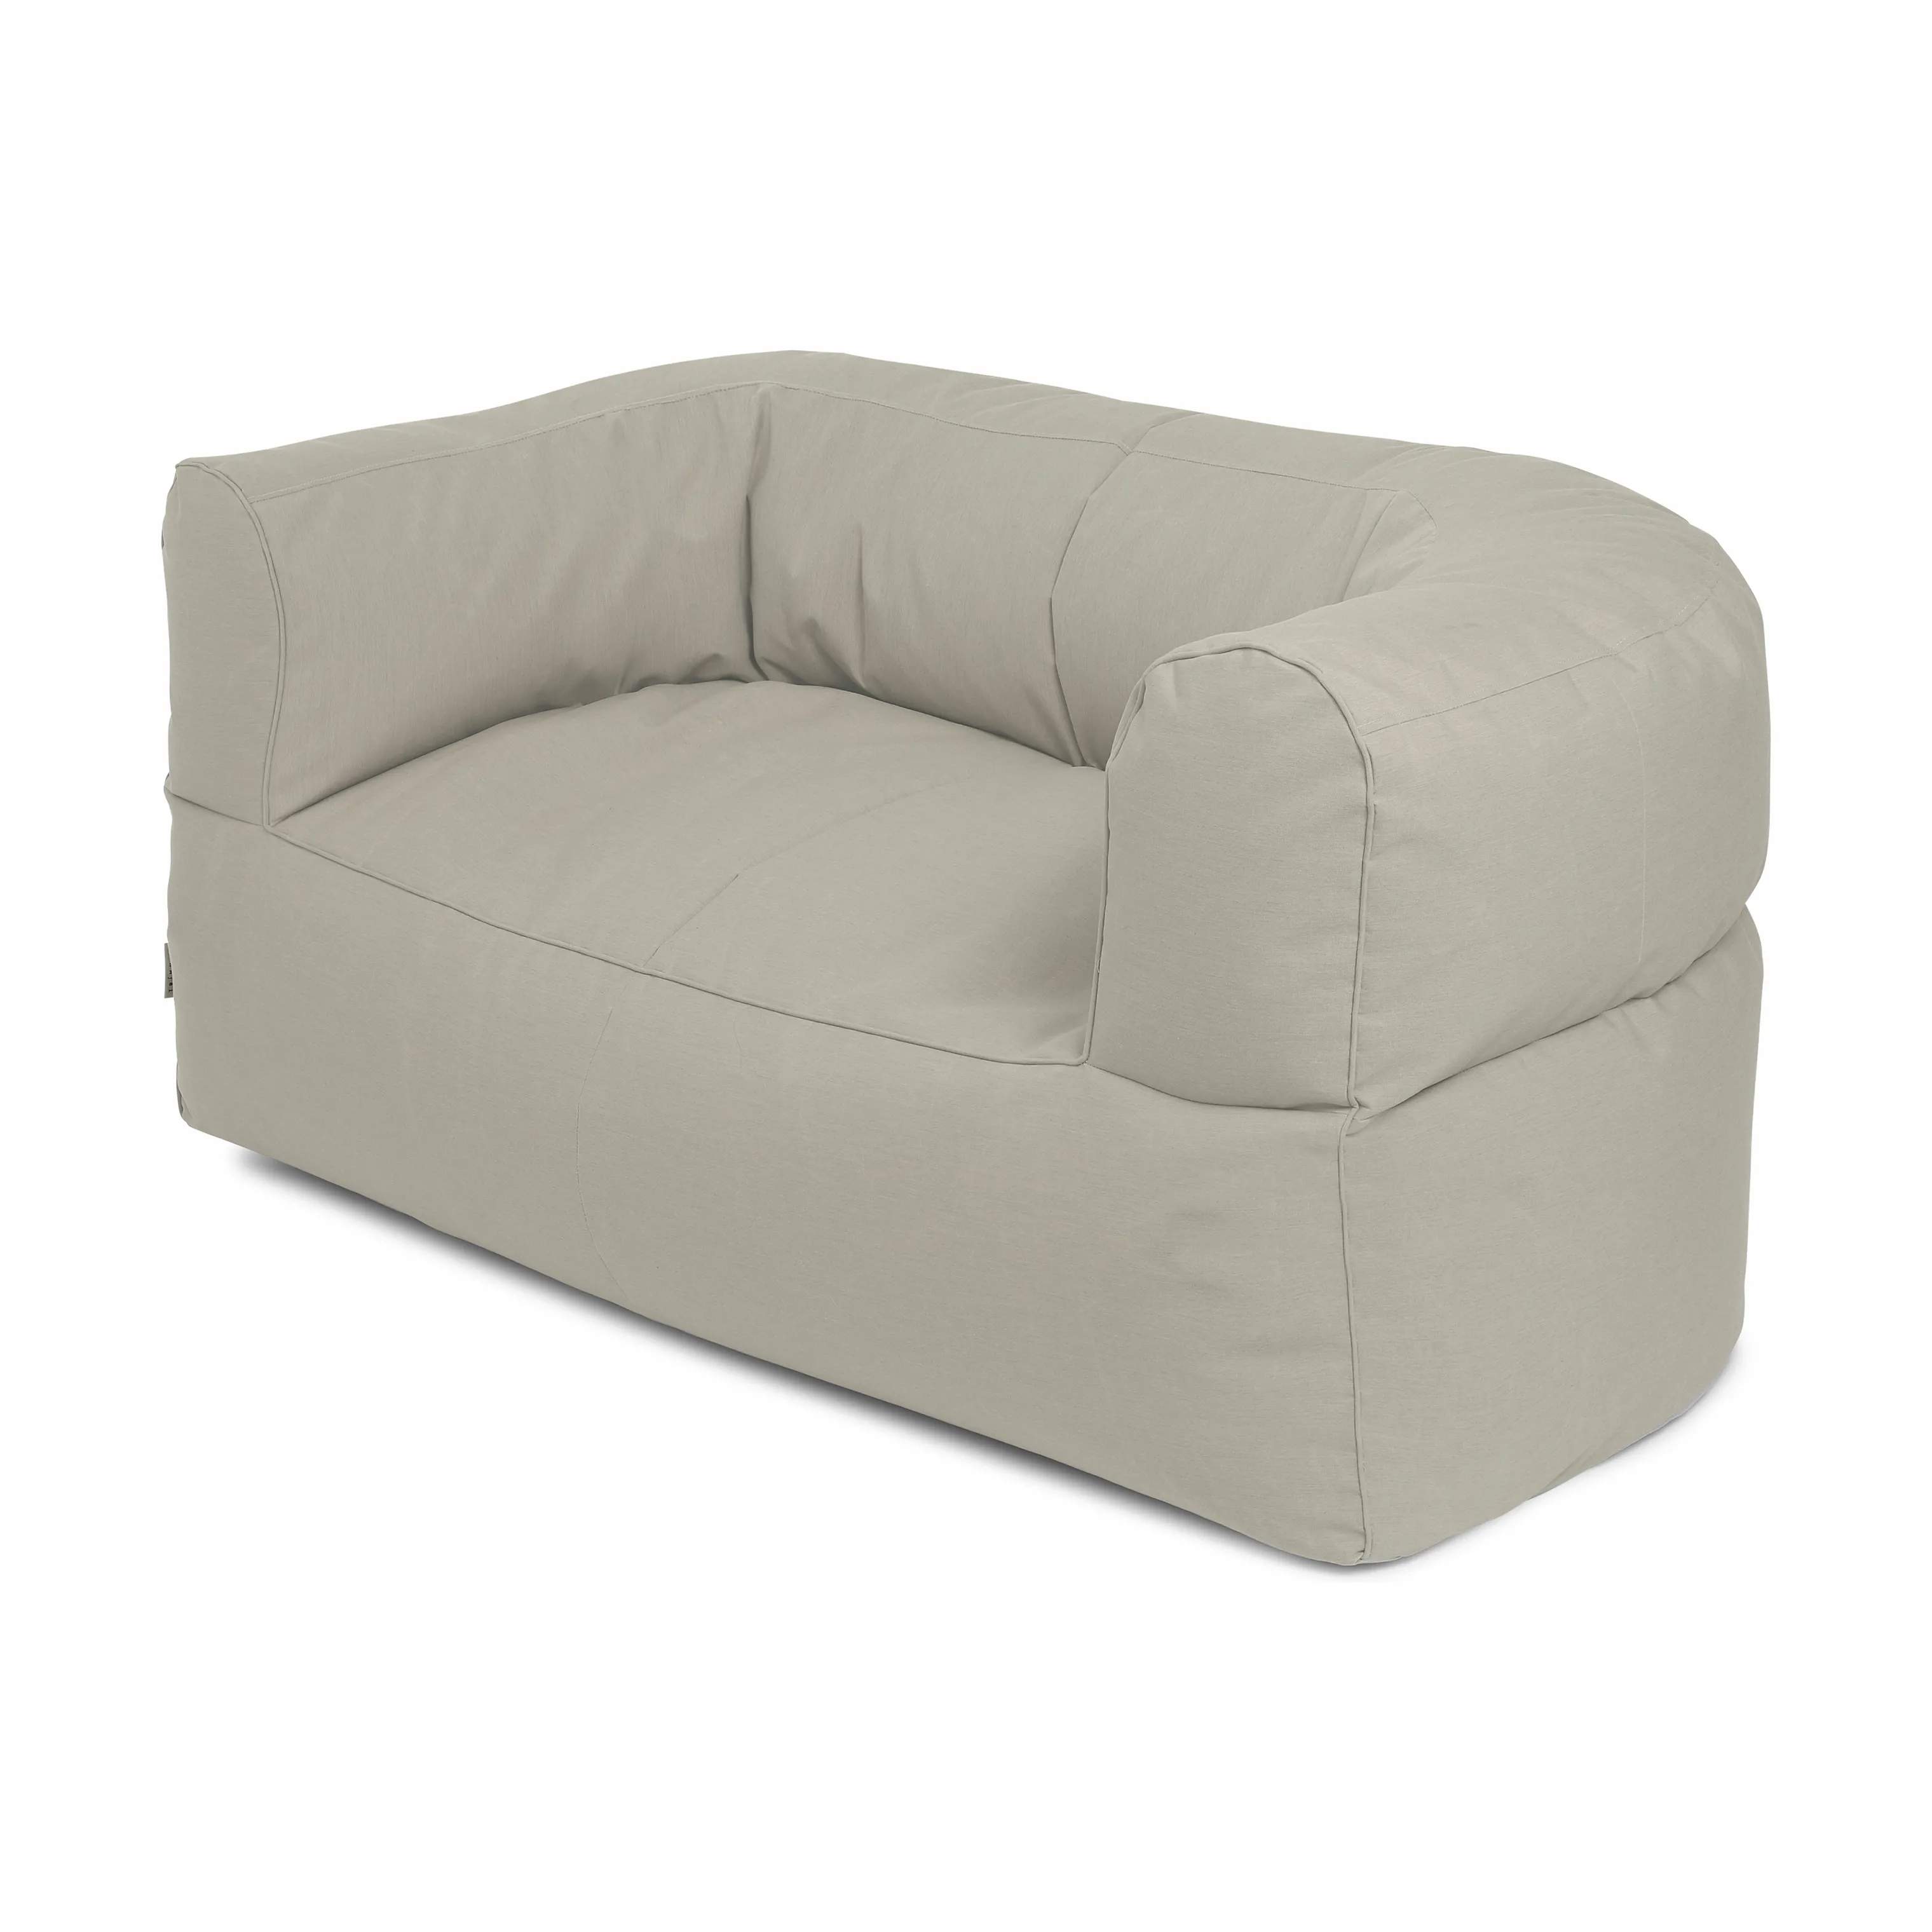 Arm-Strong Sofa, beige, large